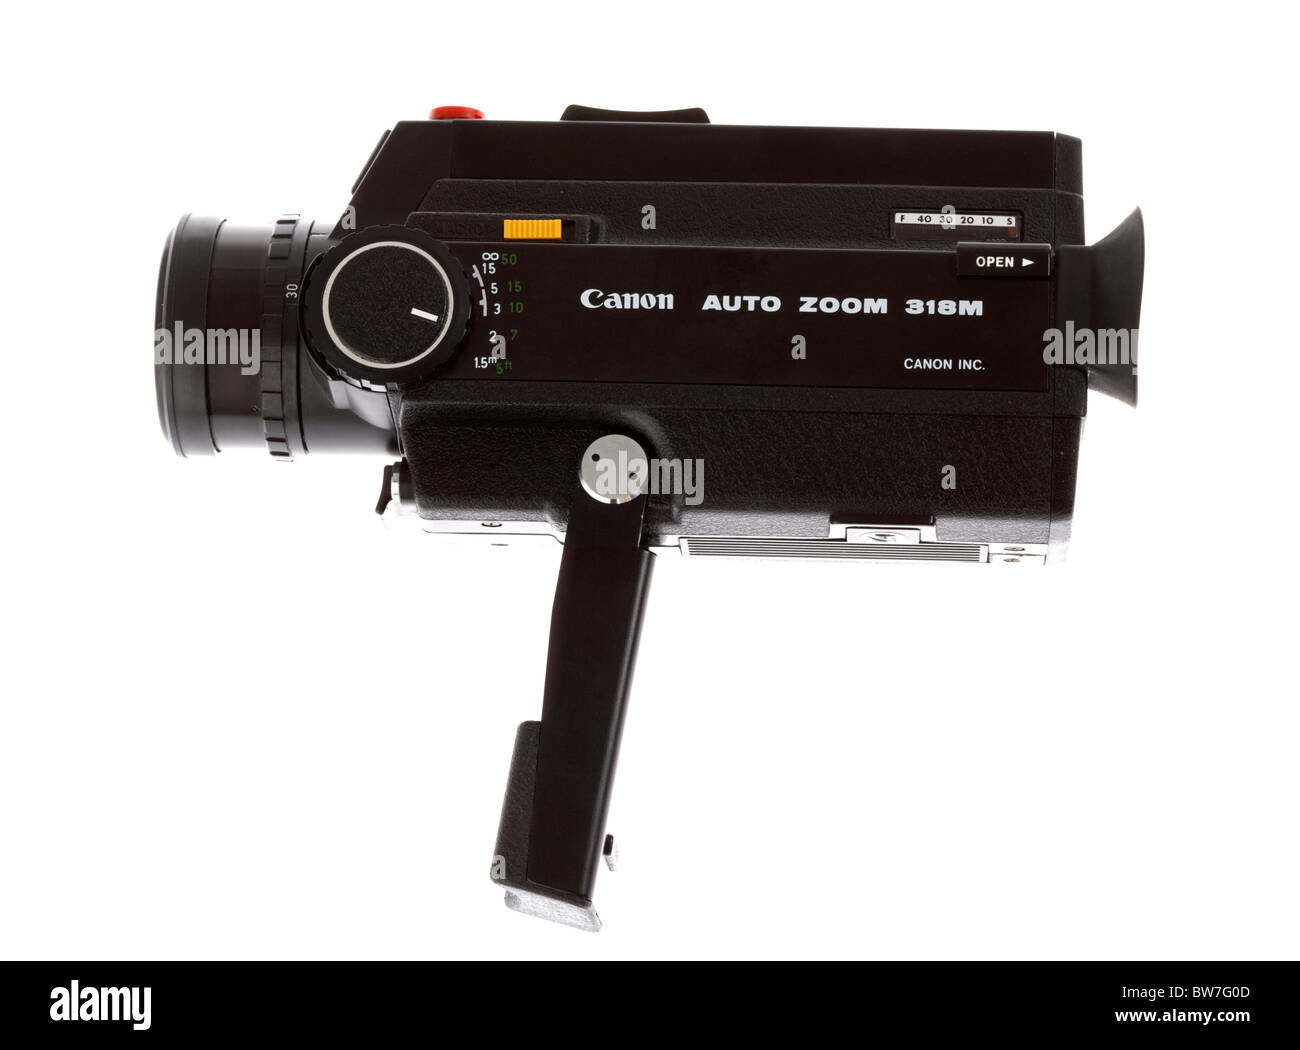 super8 cine home movie camera made by canon on white background Stock Photo